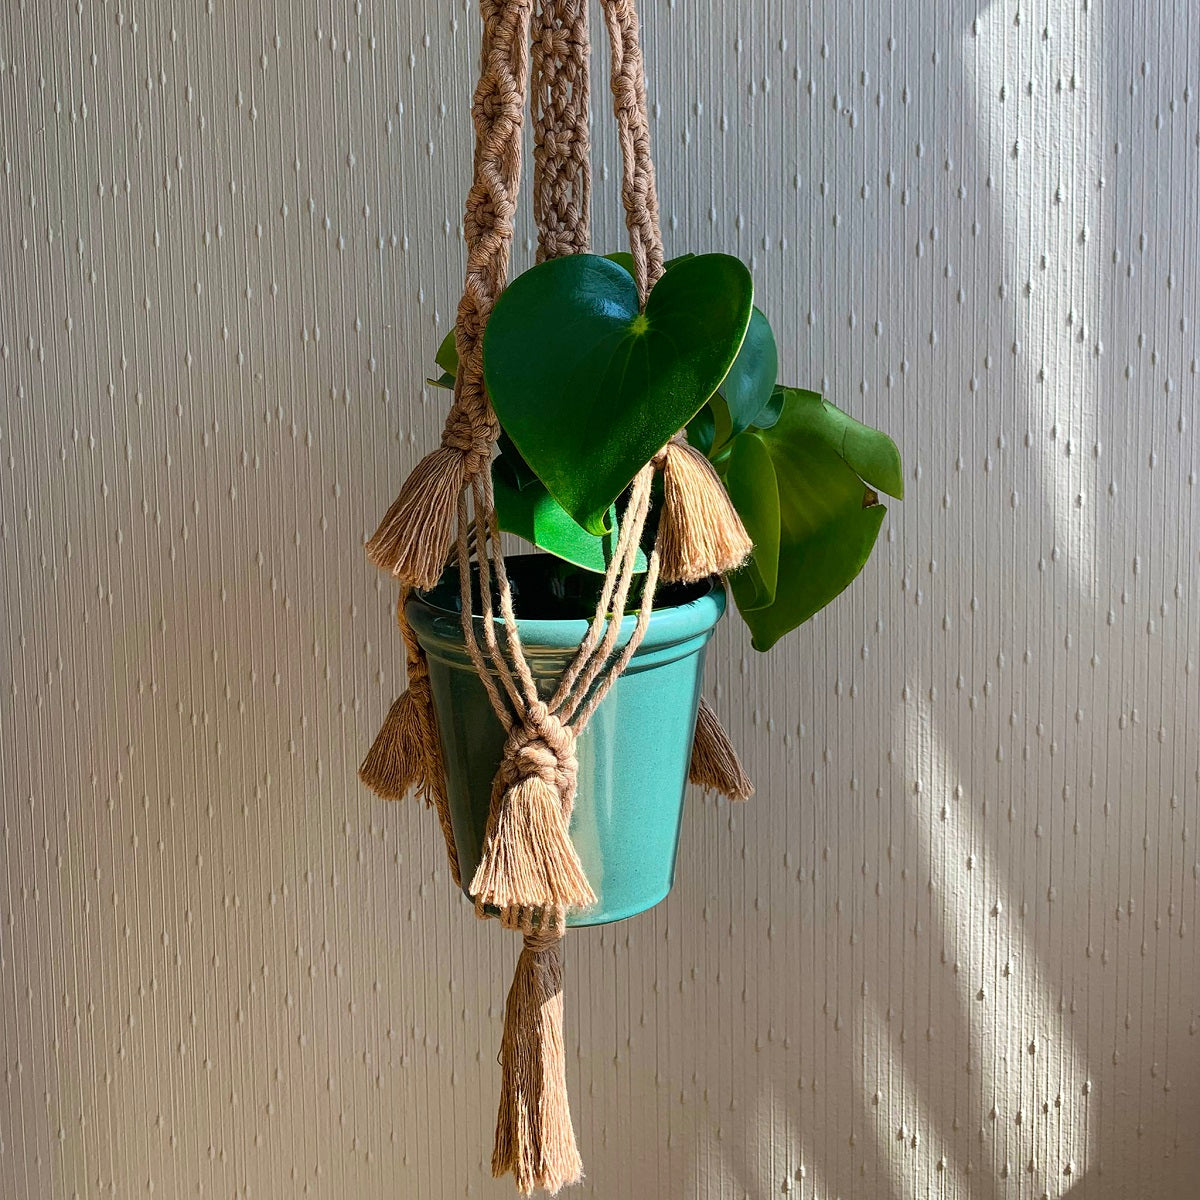 A beige macrame plant hanger with fringe detailing with a green planter and plant in it